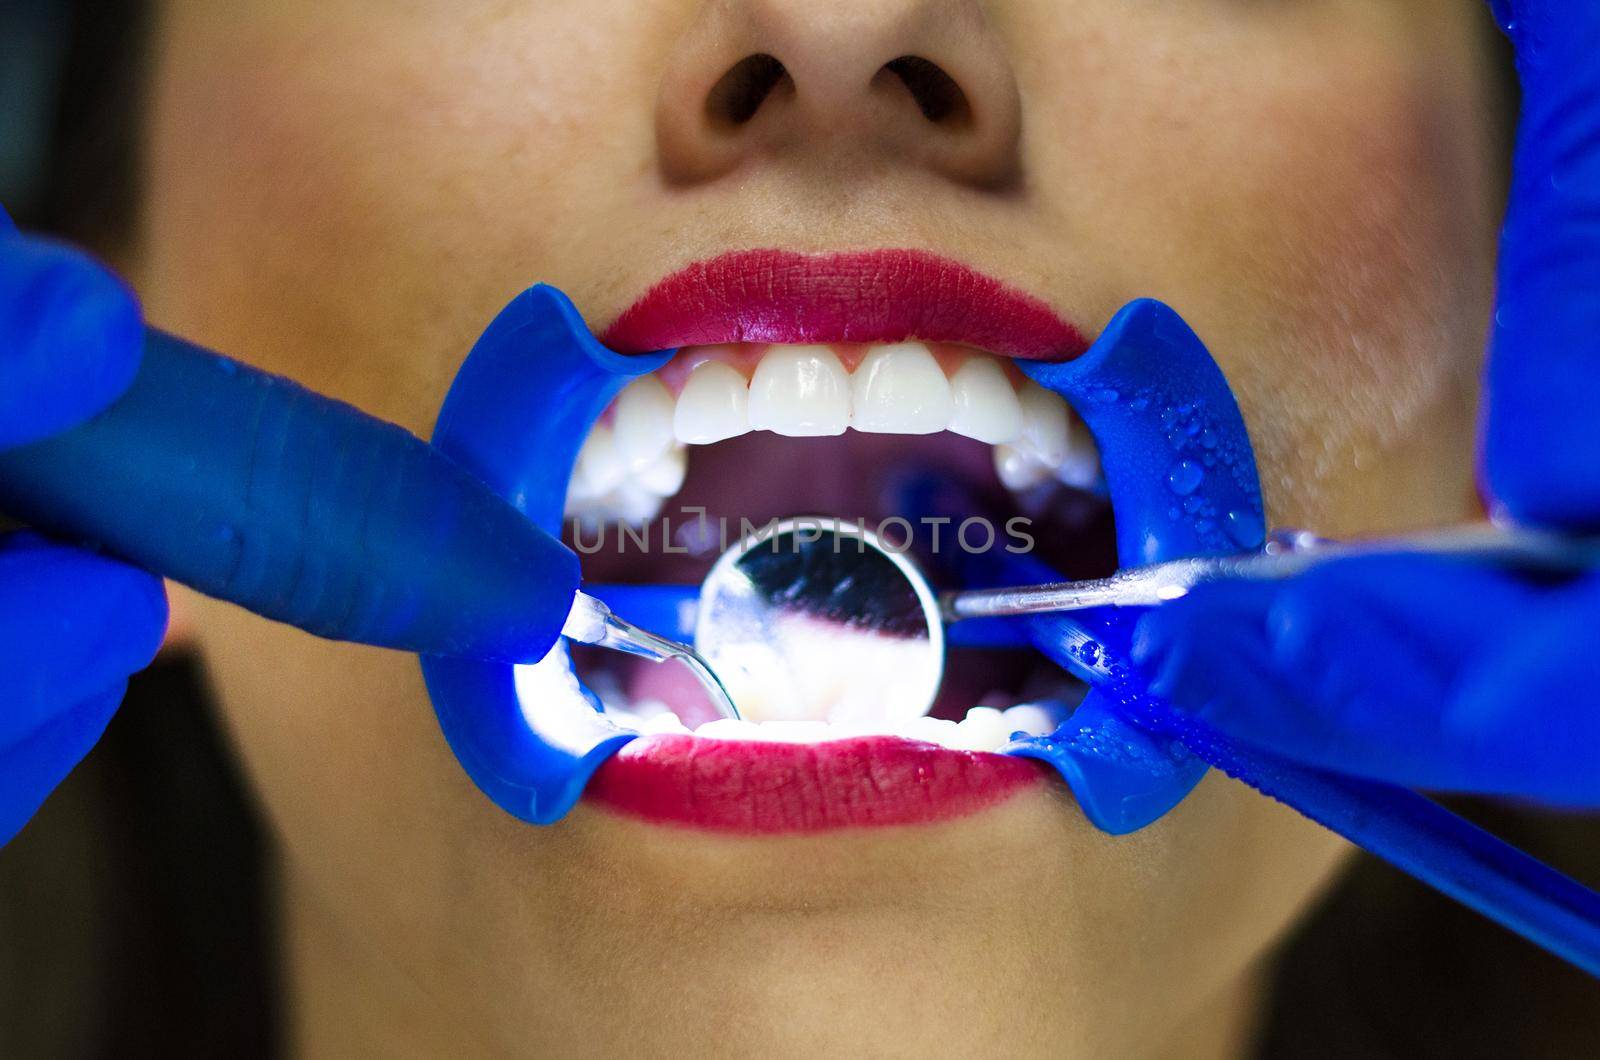 Periodic comprehensive dental examination to have a healthy teeth by Peruphotoart